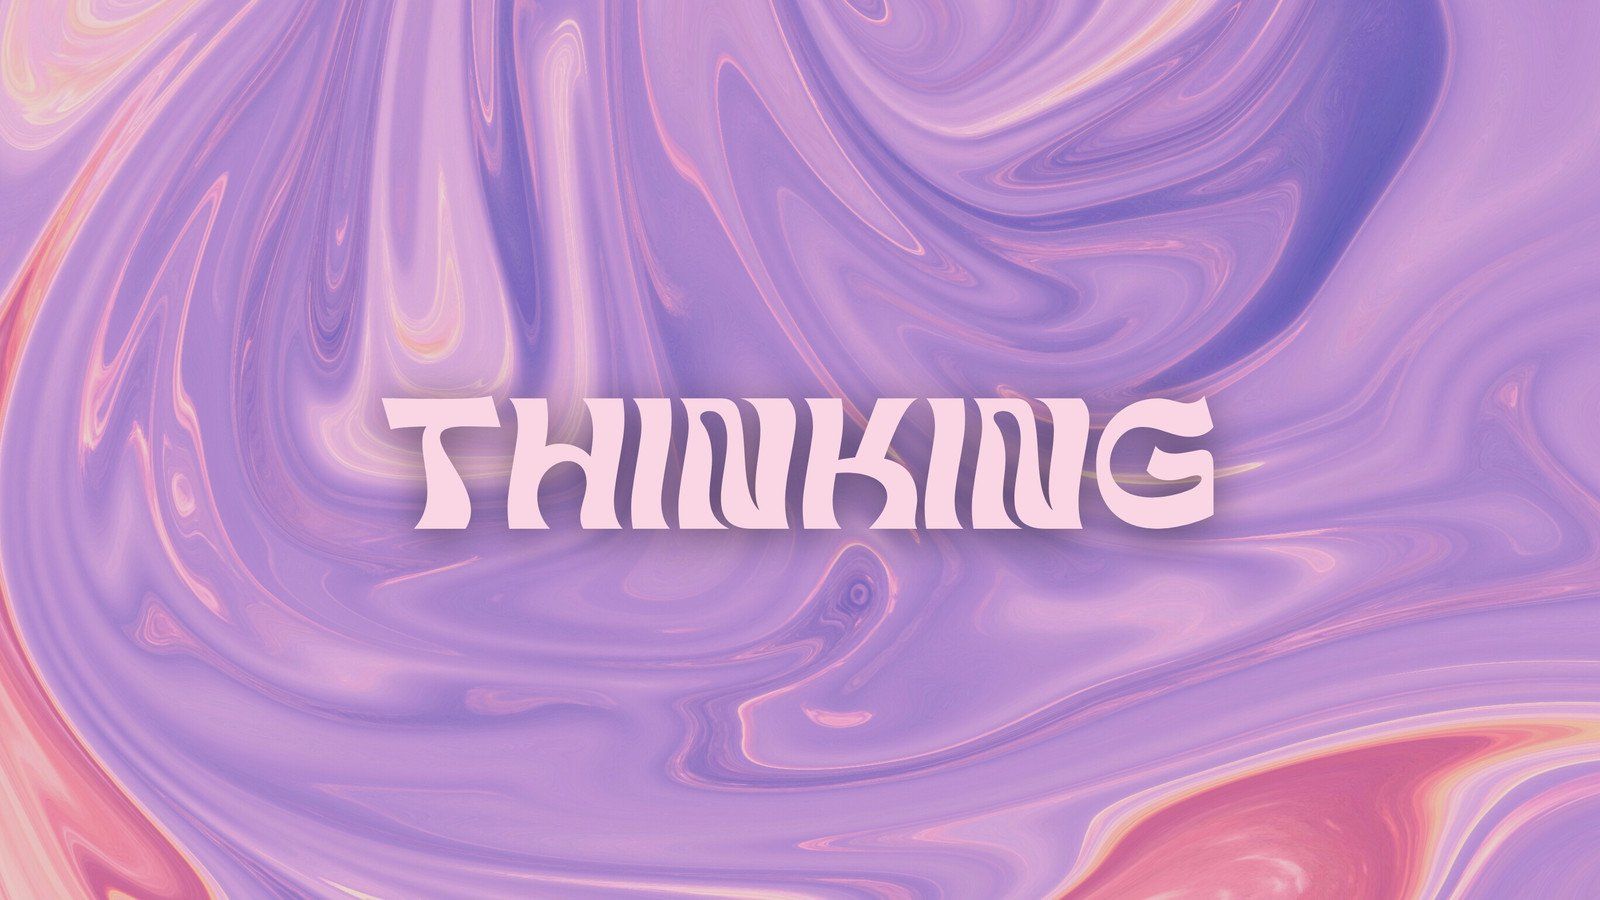 A purple and pink swirled background with the word 